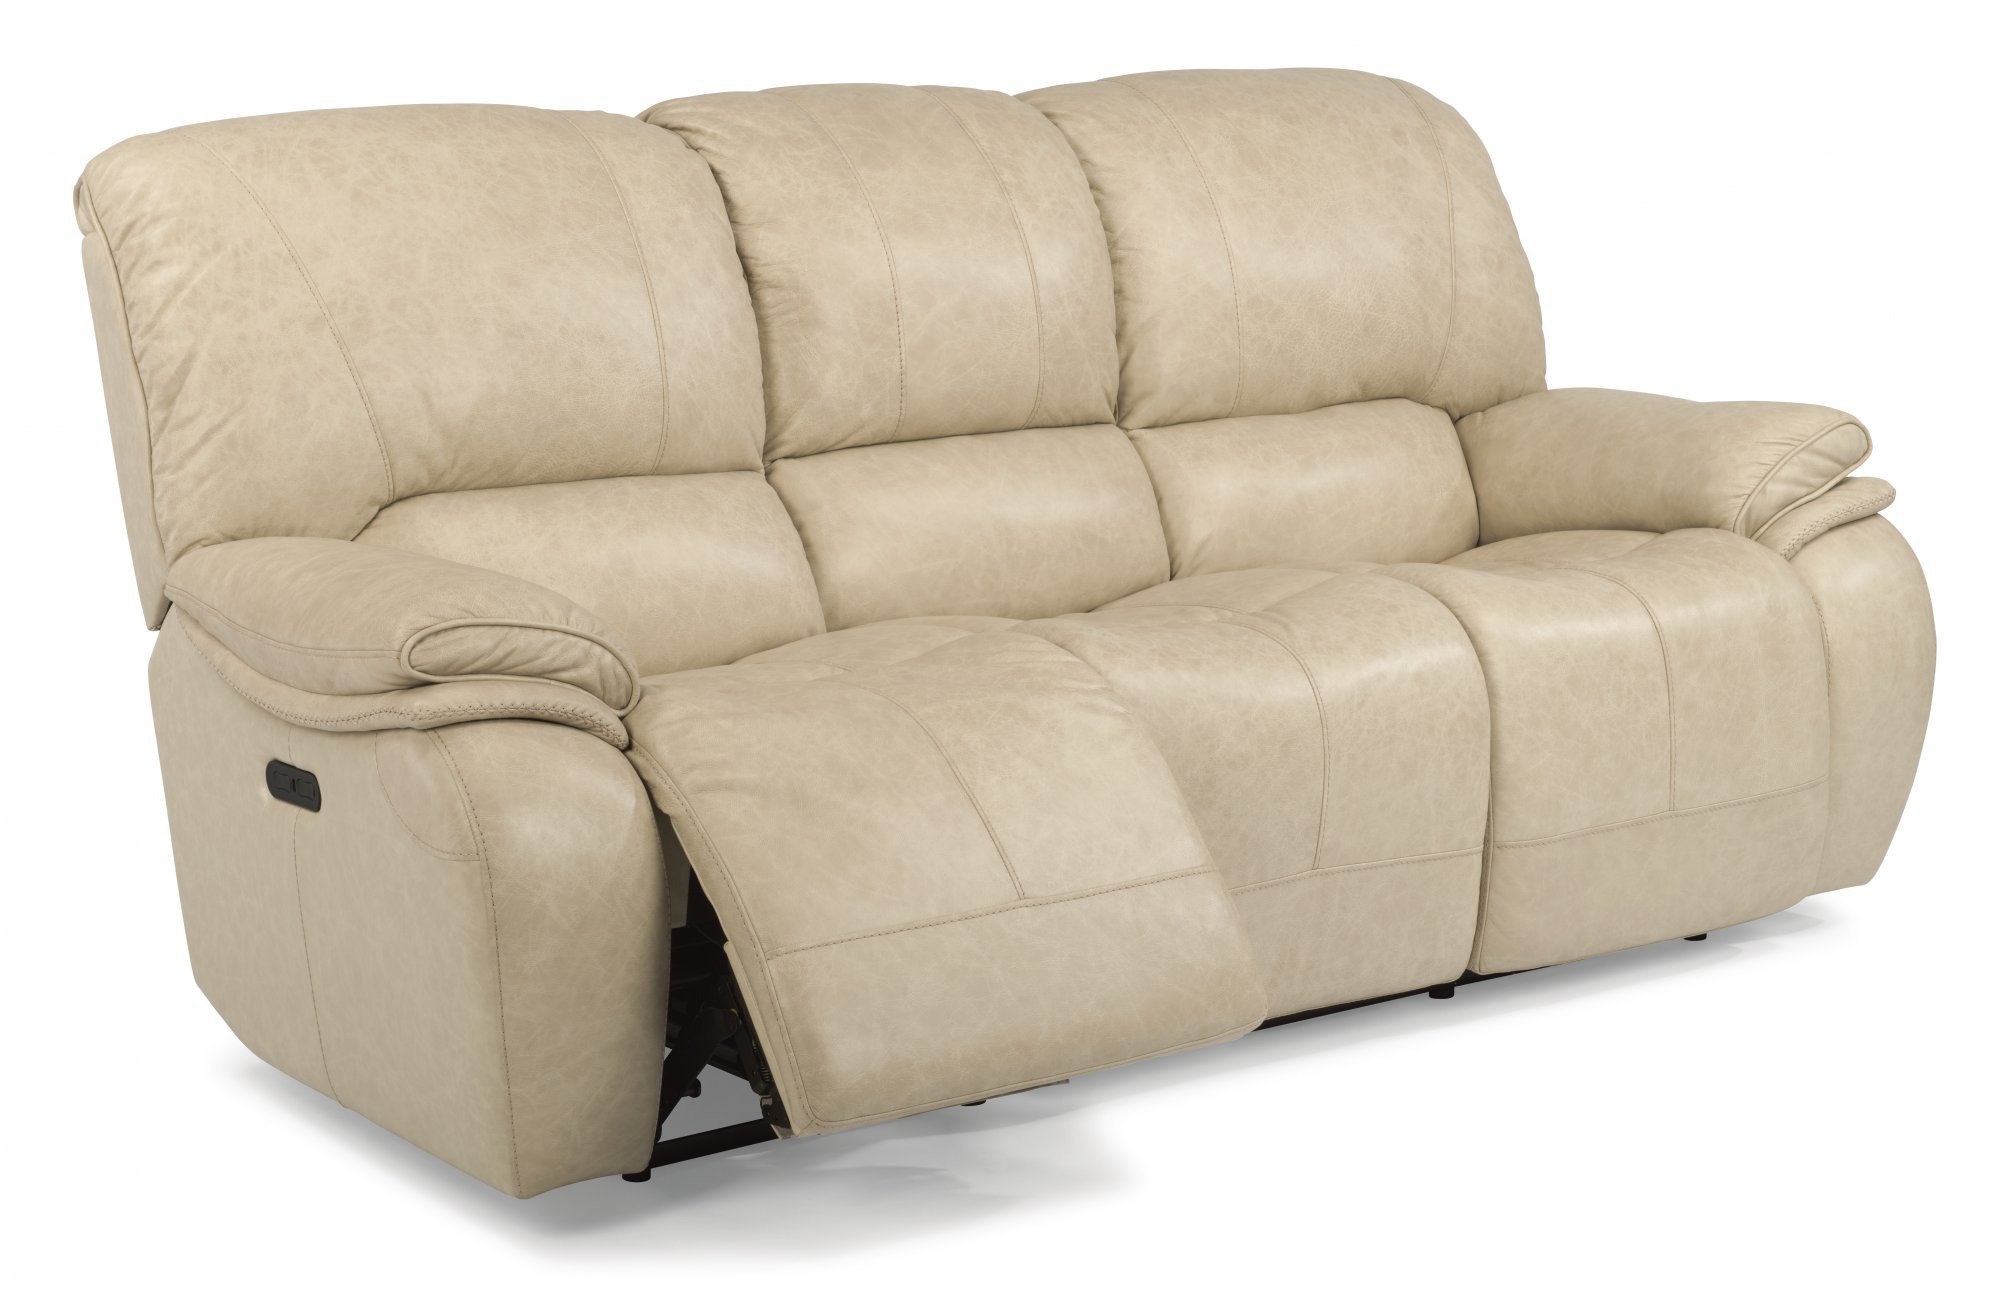 Reclining Chairs & Sofas.